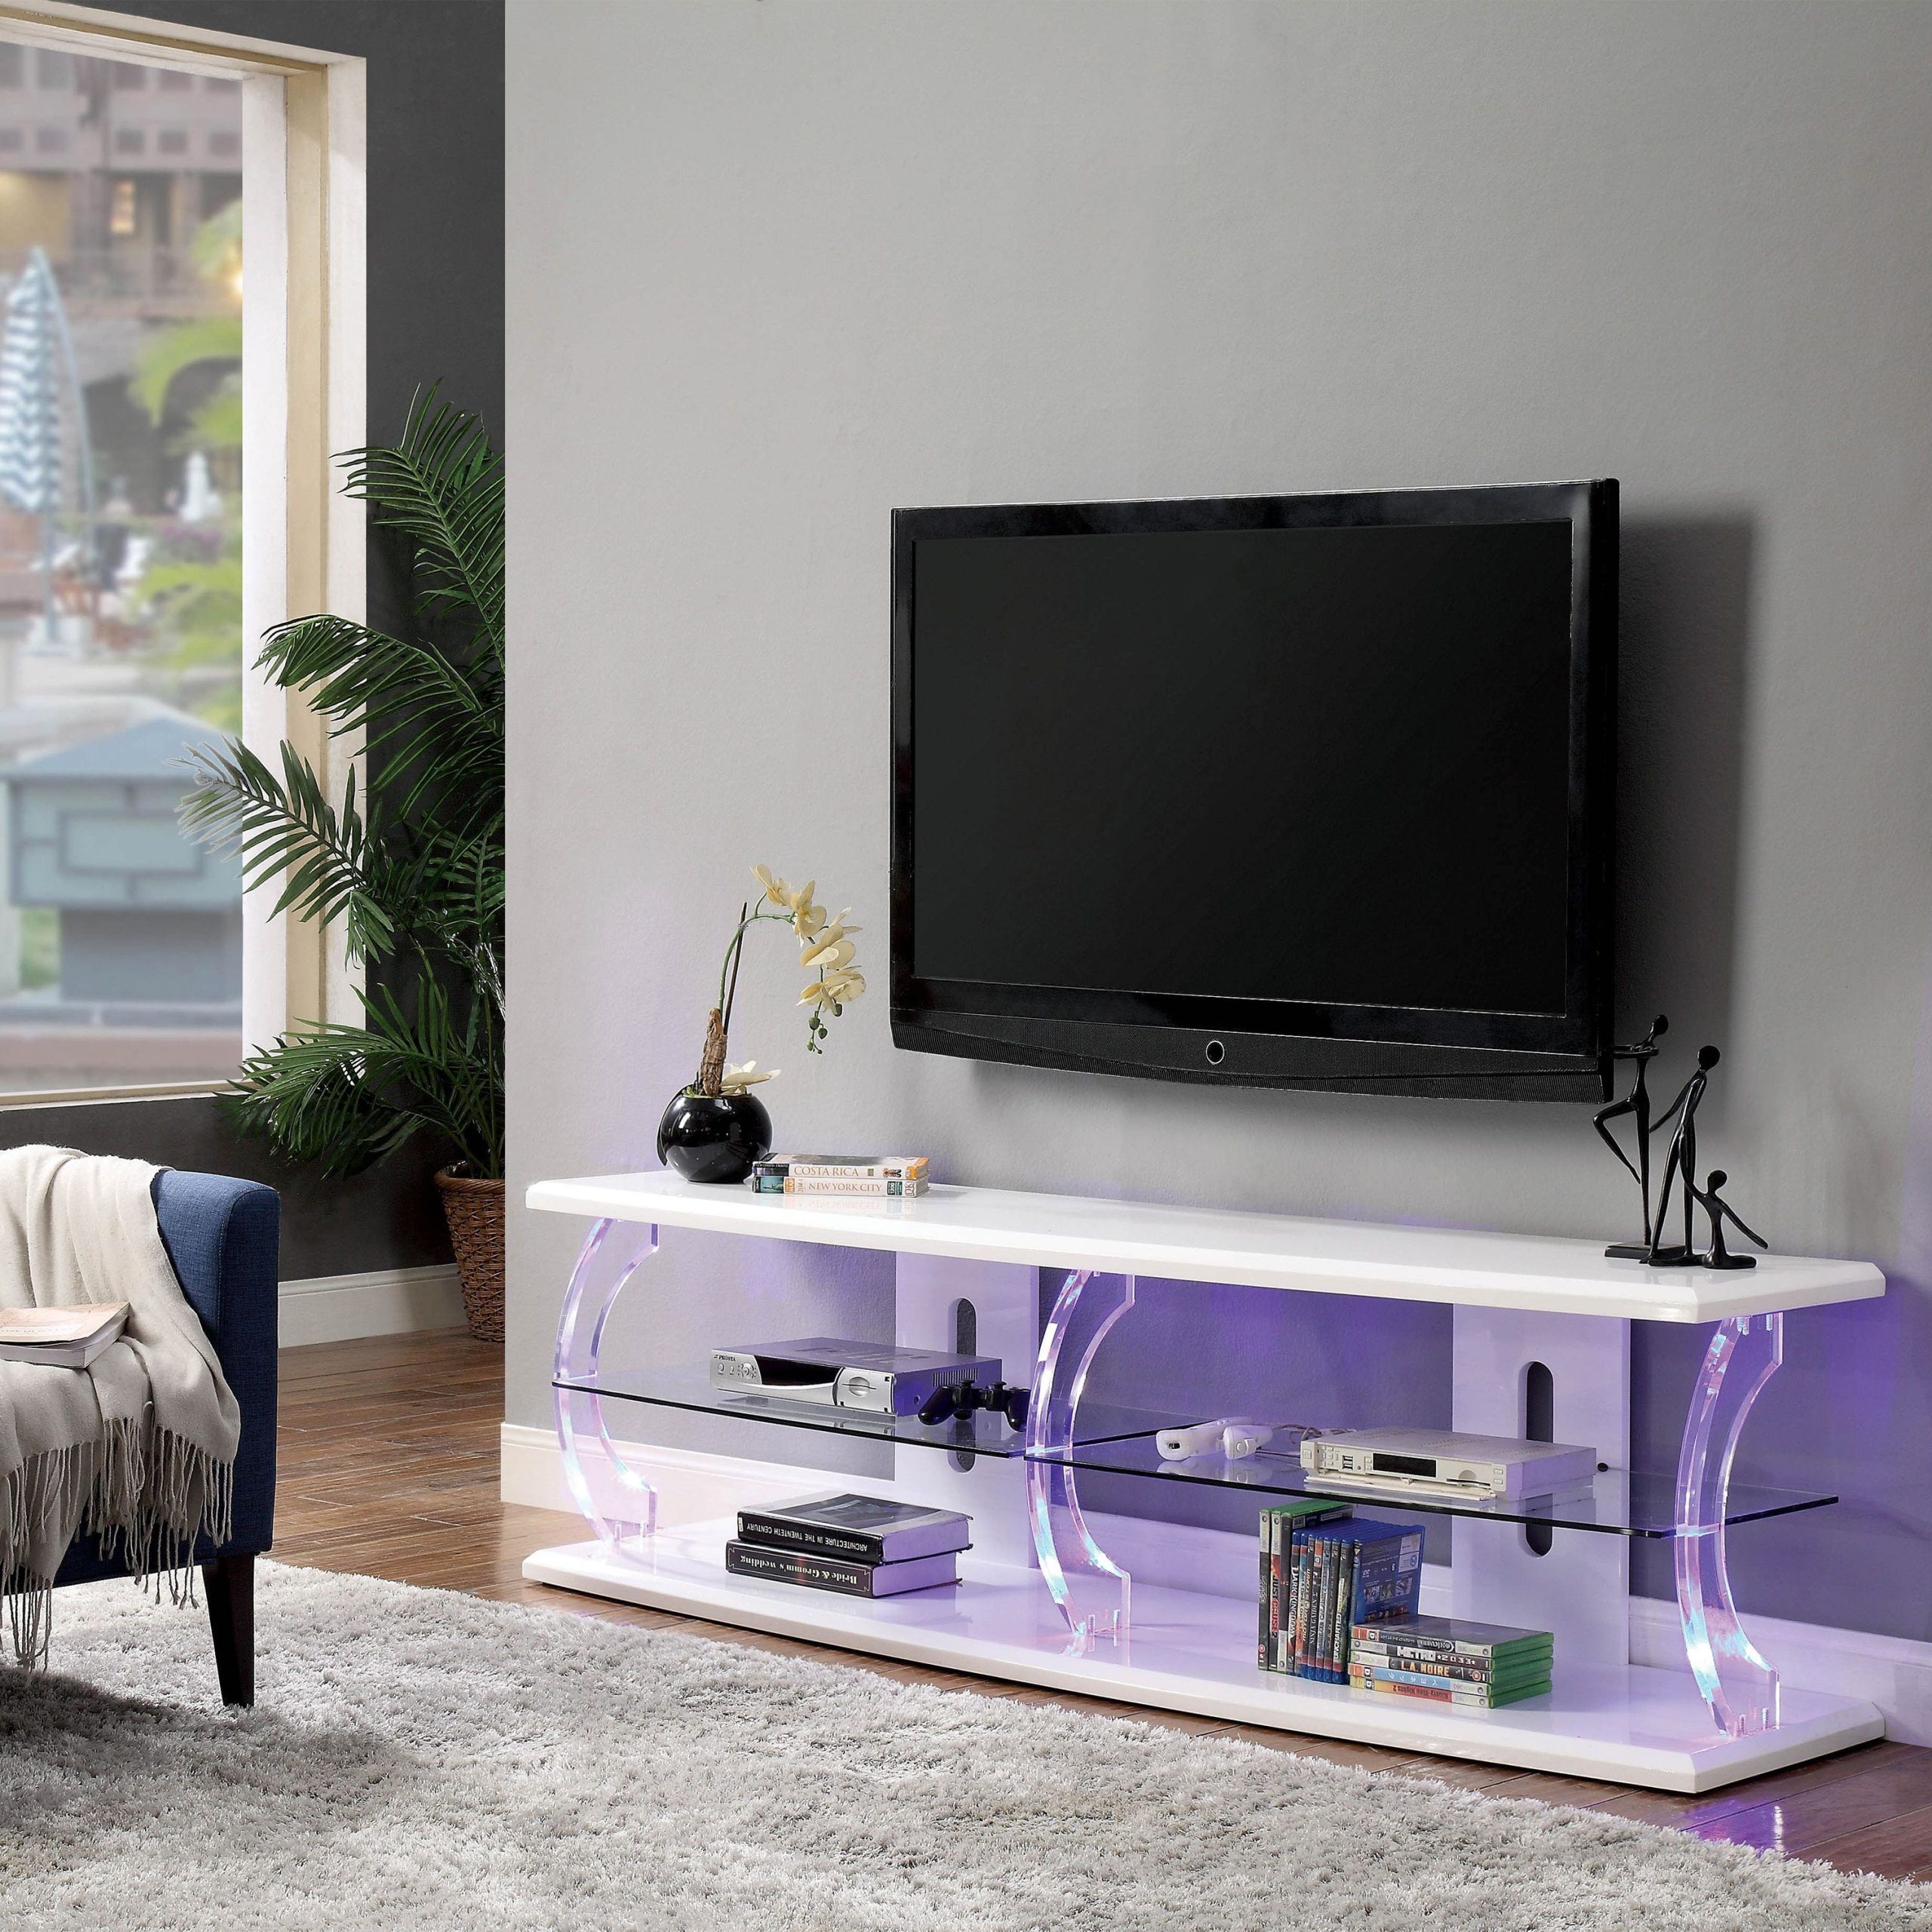 Furniture Of America Vedot Contemporary Led Tv Stand, 72", White And Regarding Led Tv Stands With Outlet (View 2 of 20)